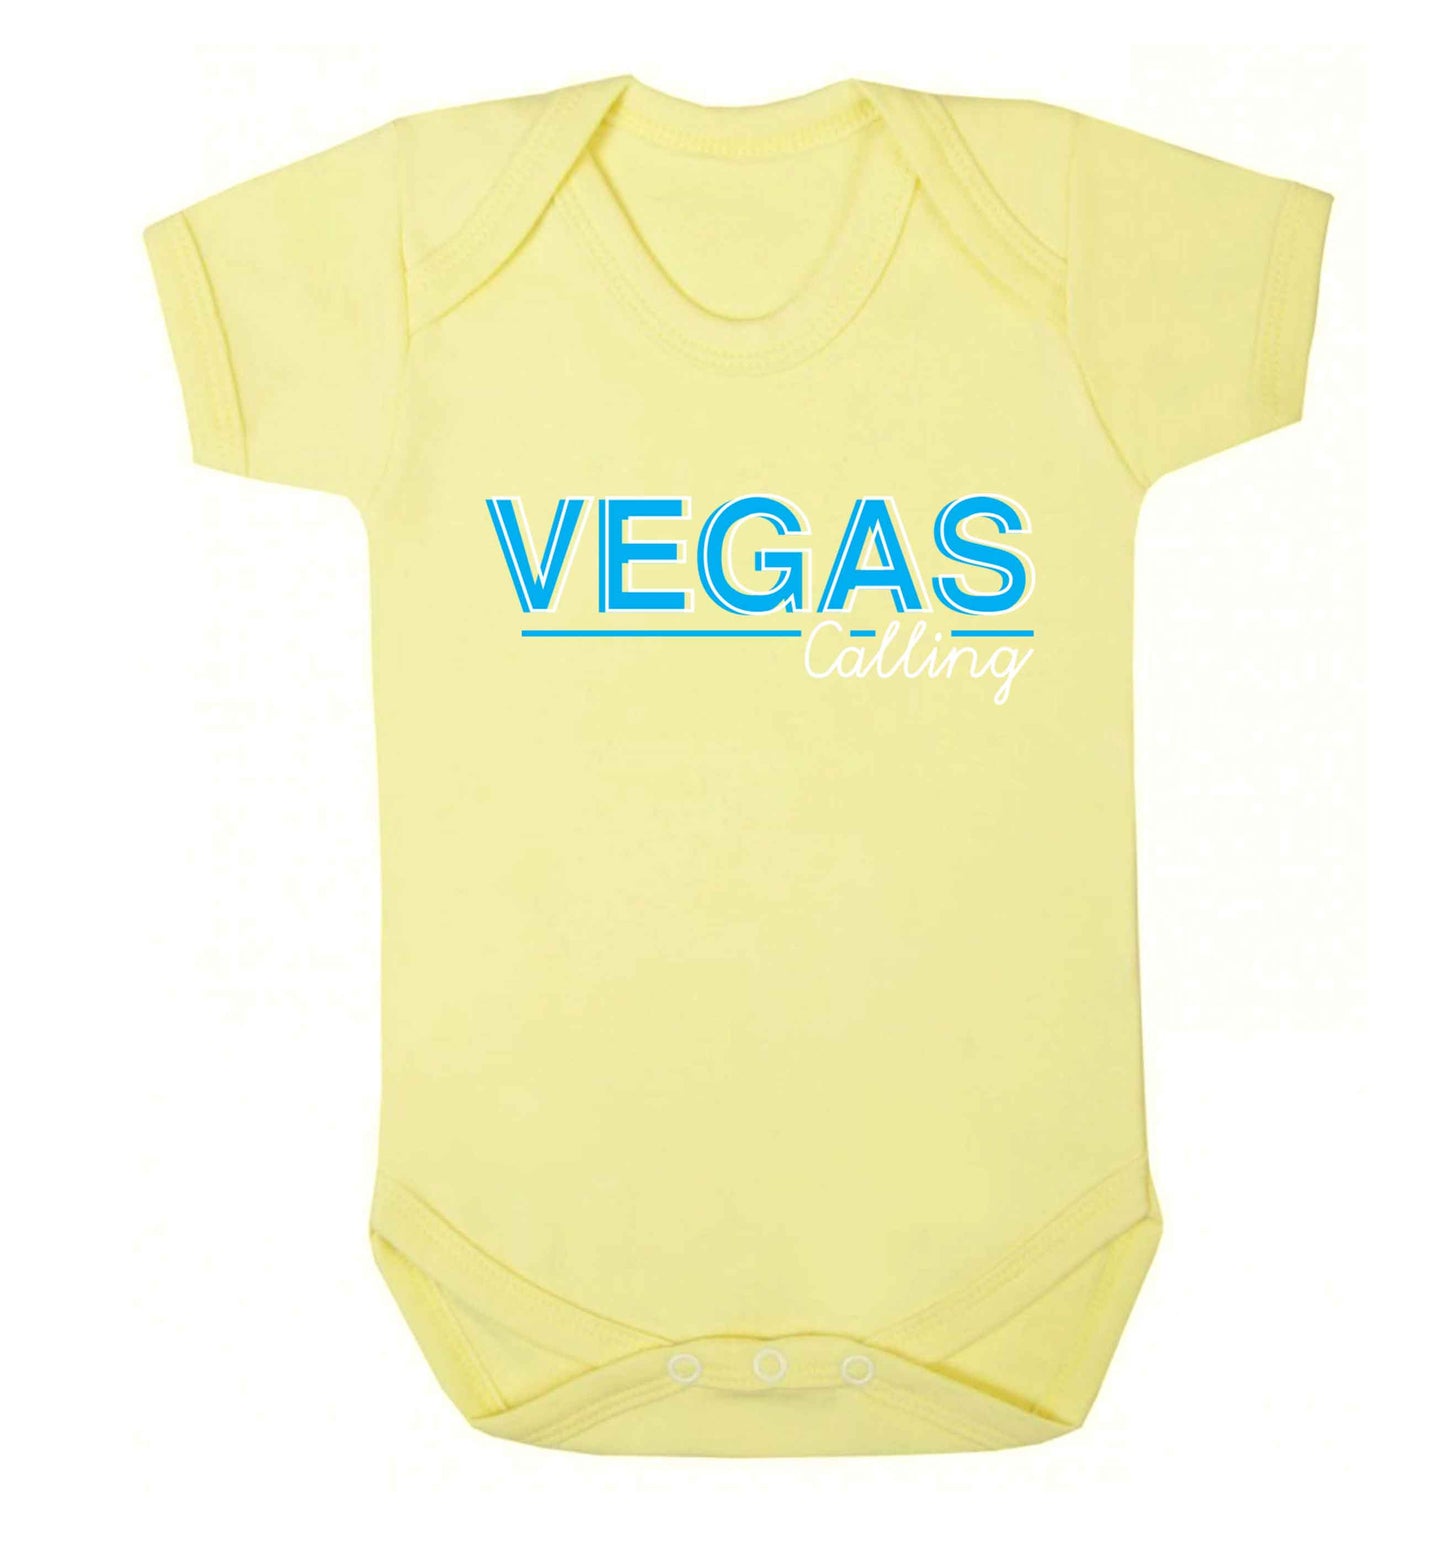 Vegas calling Baby Vest pale yellow 18-24 months